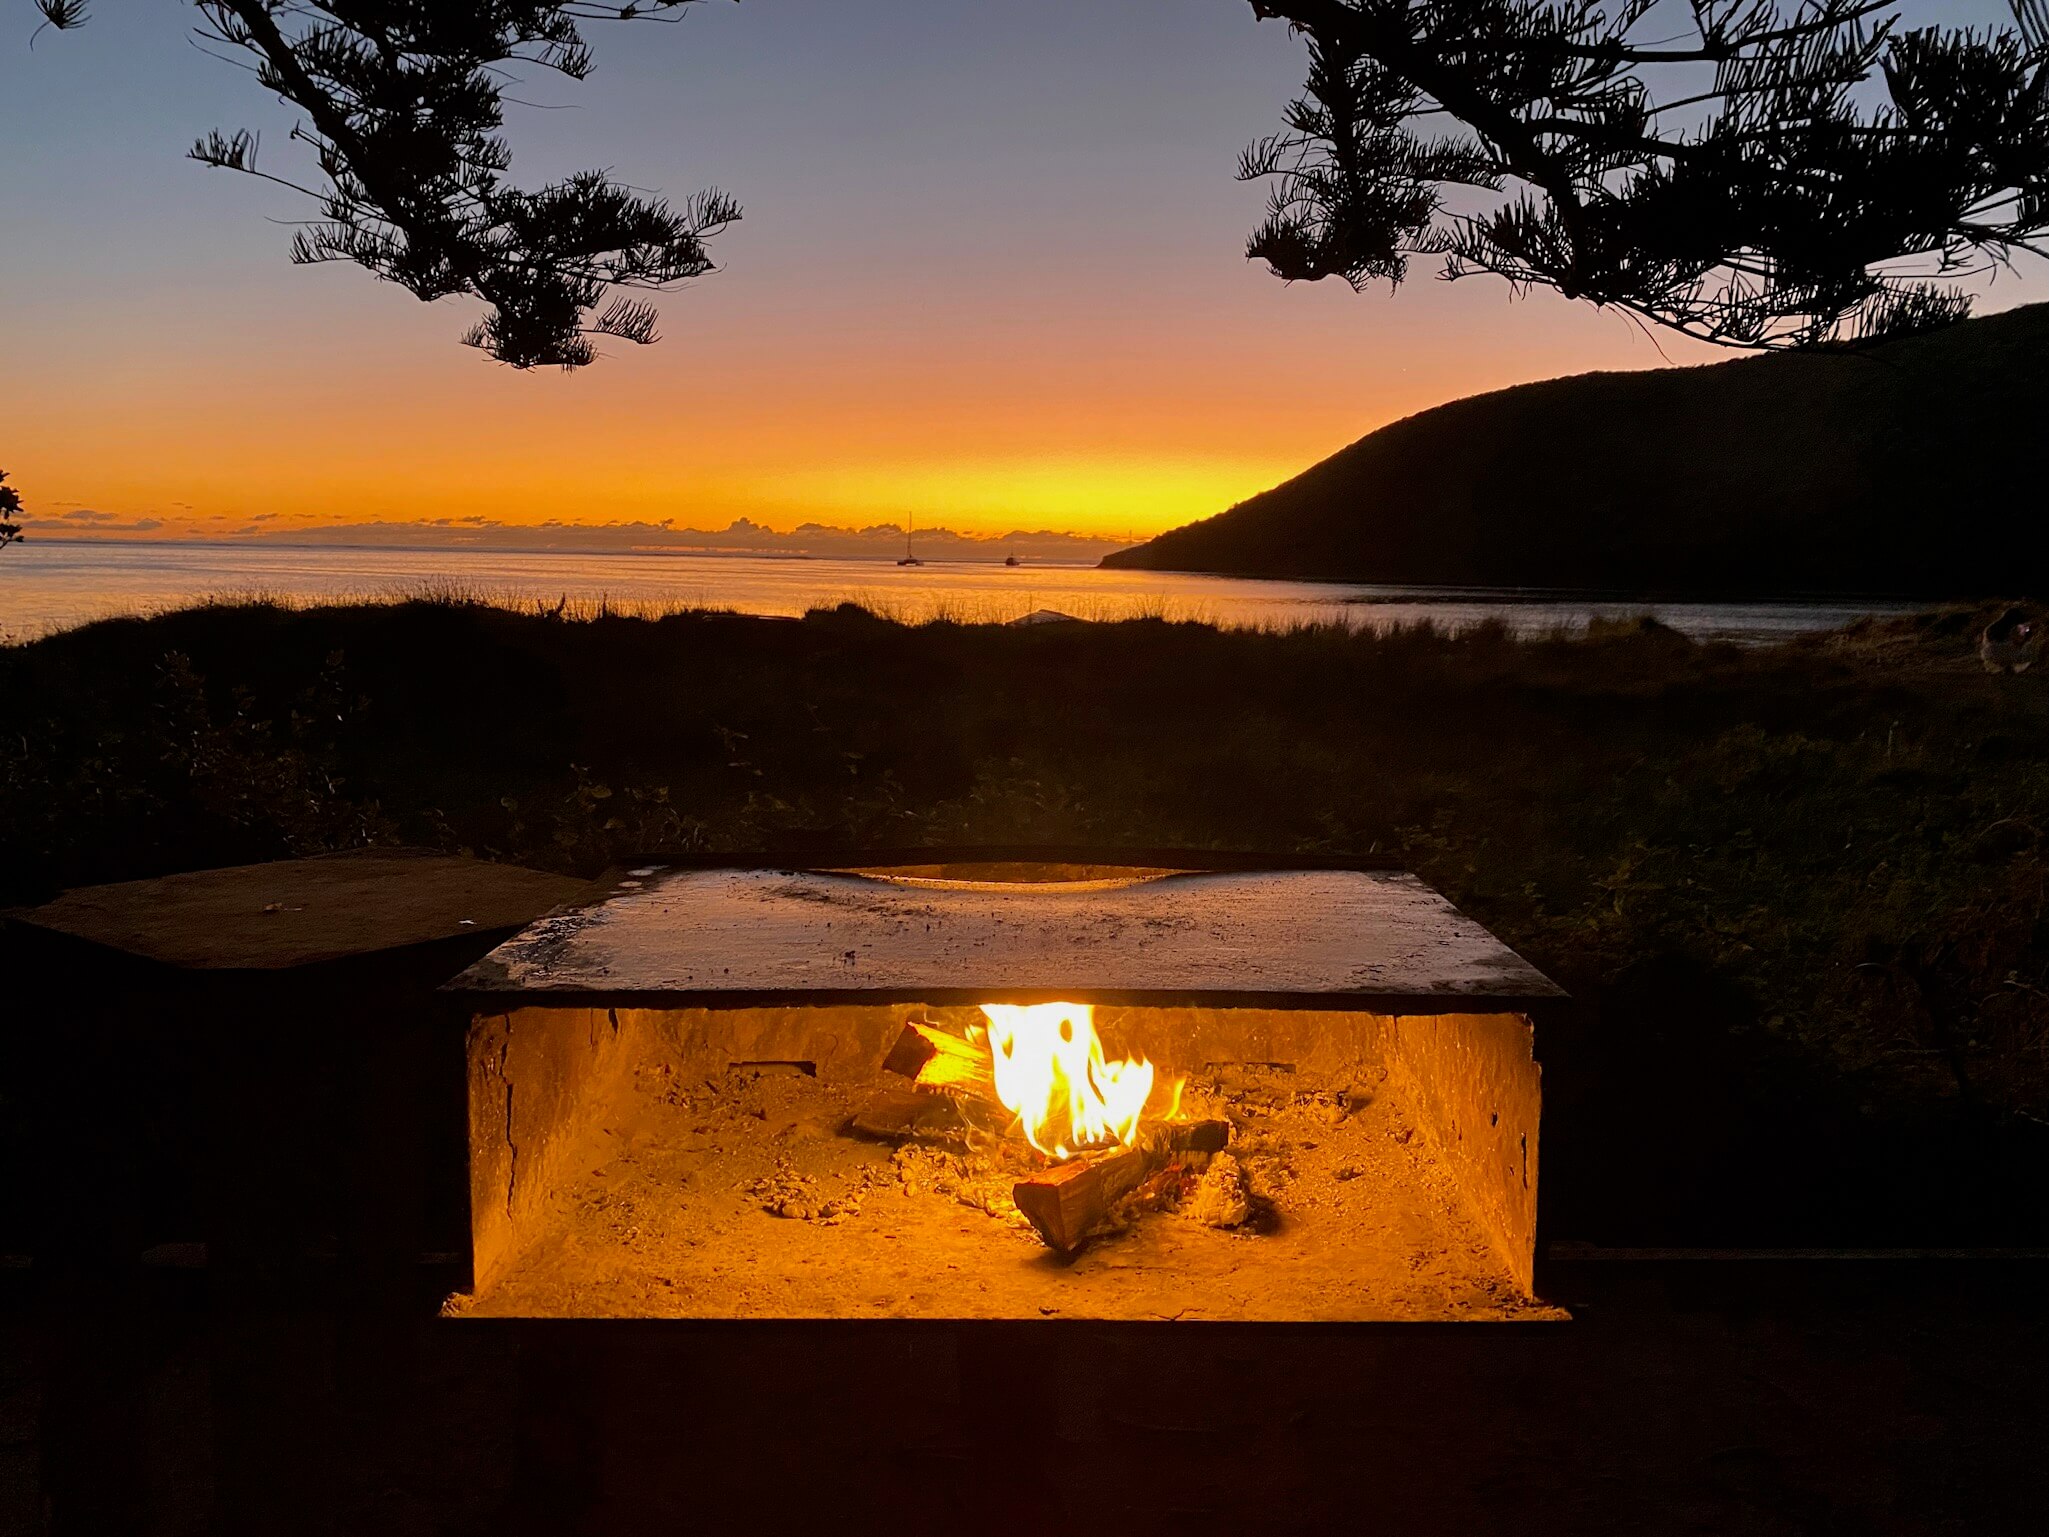 Sunset fires – Maddy Andrews. Judges’ comments: “The Island’s unique BBQs bring locals and tourists together for special times with friends and family.” (Runner up)